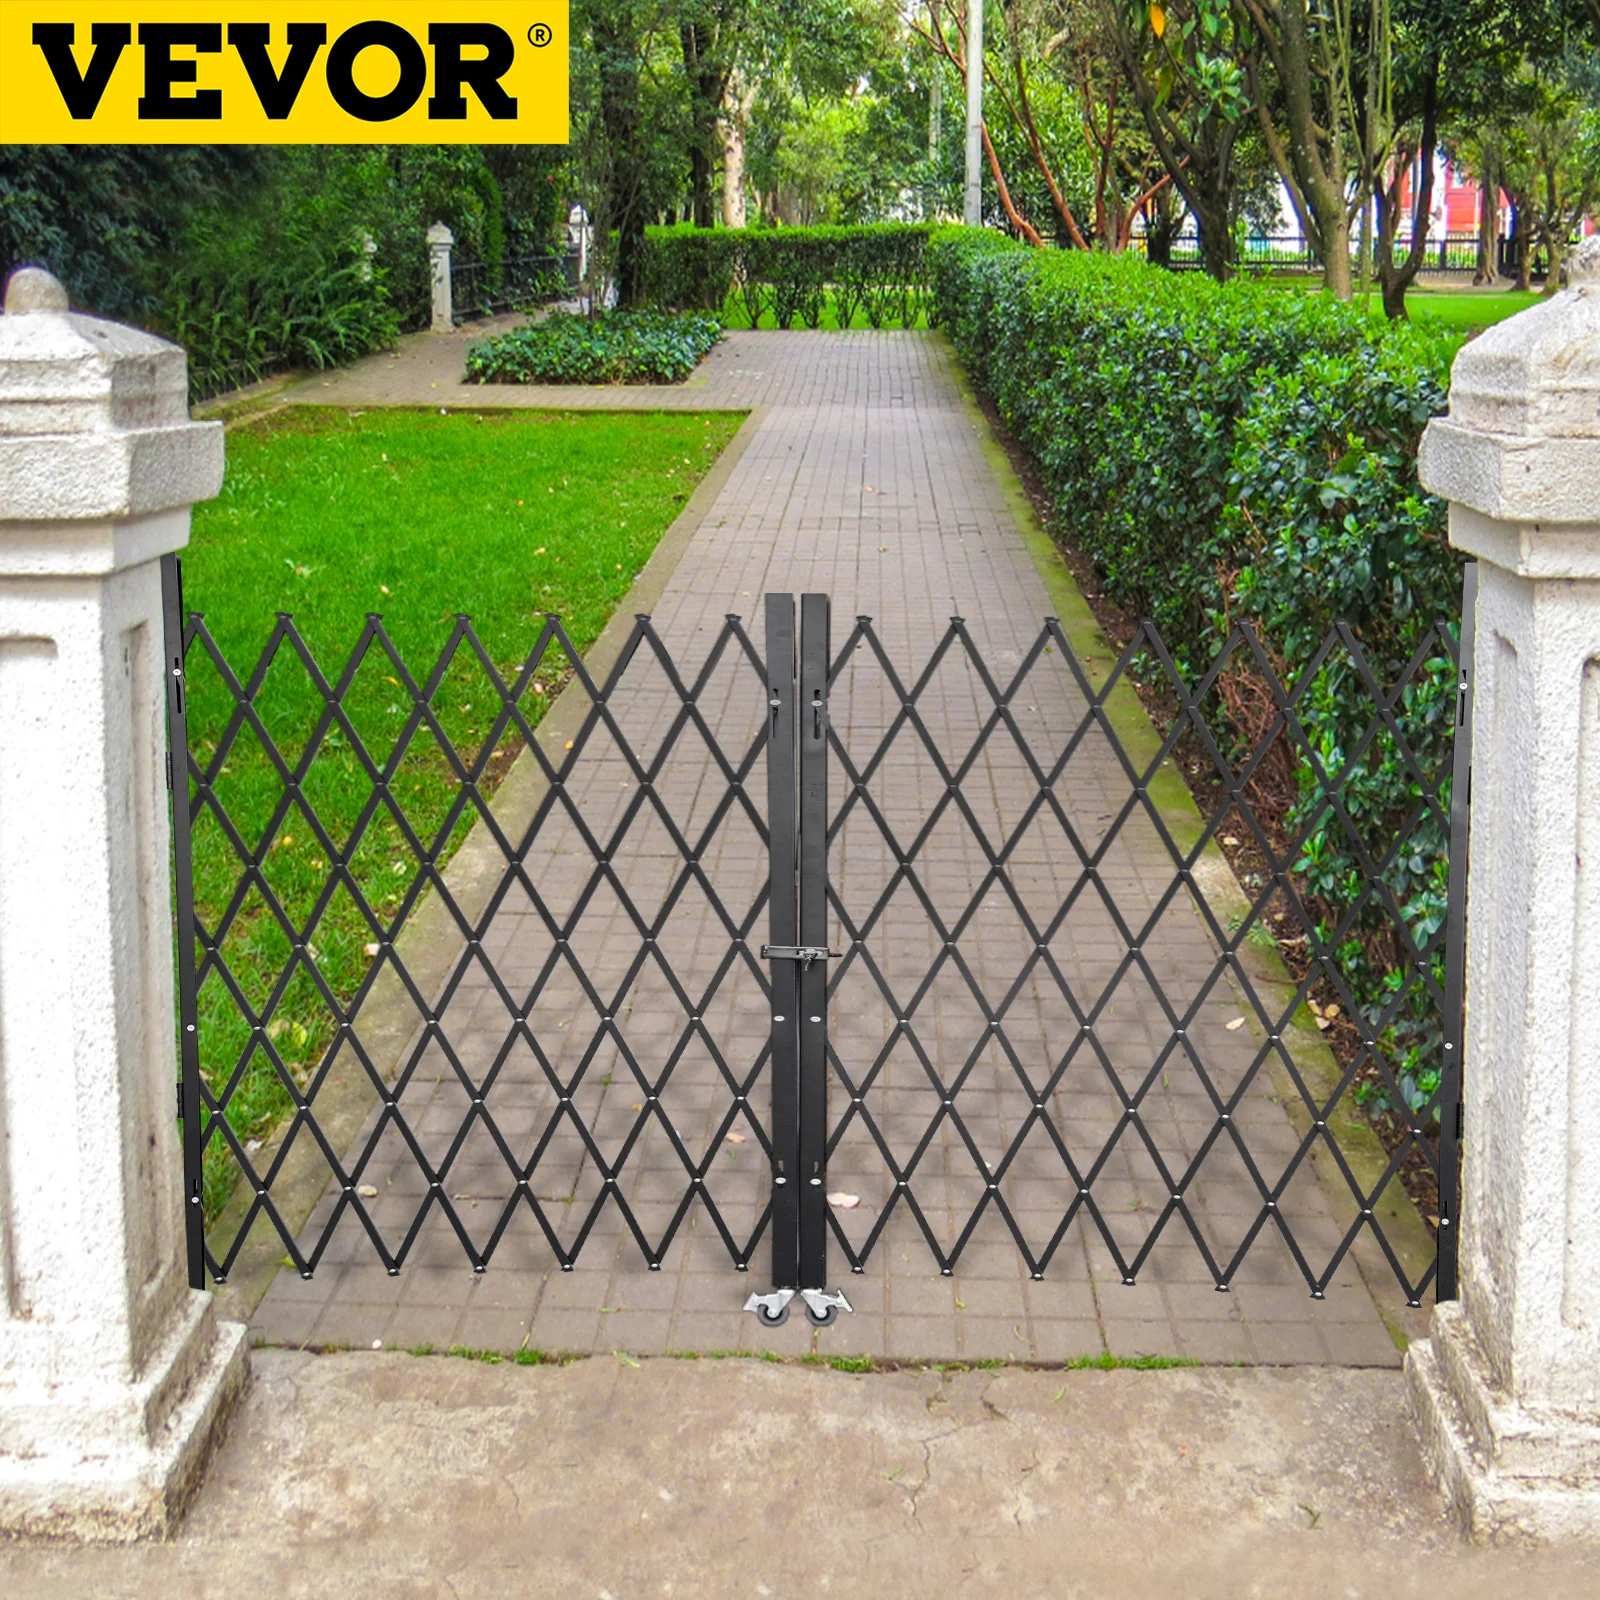 

VEVOR Double Folding Security Gate 1.5-2 x 3-3.66m Folding Door Gate Steel Accordion Flexible Expanding Security Gate With Wheel